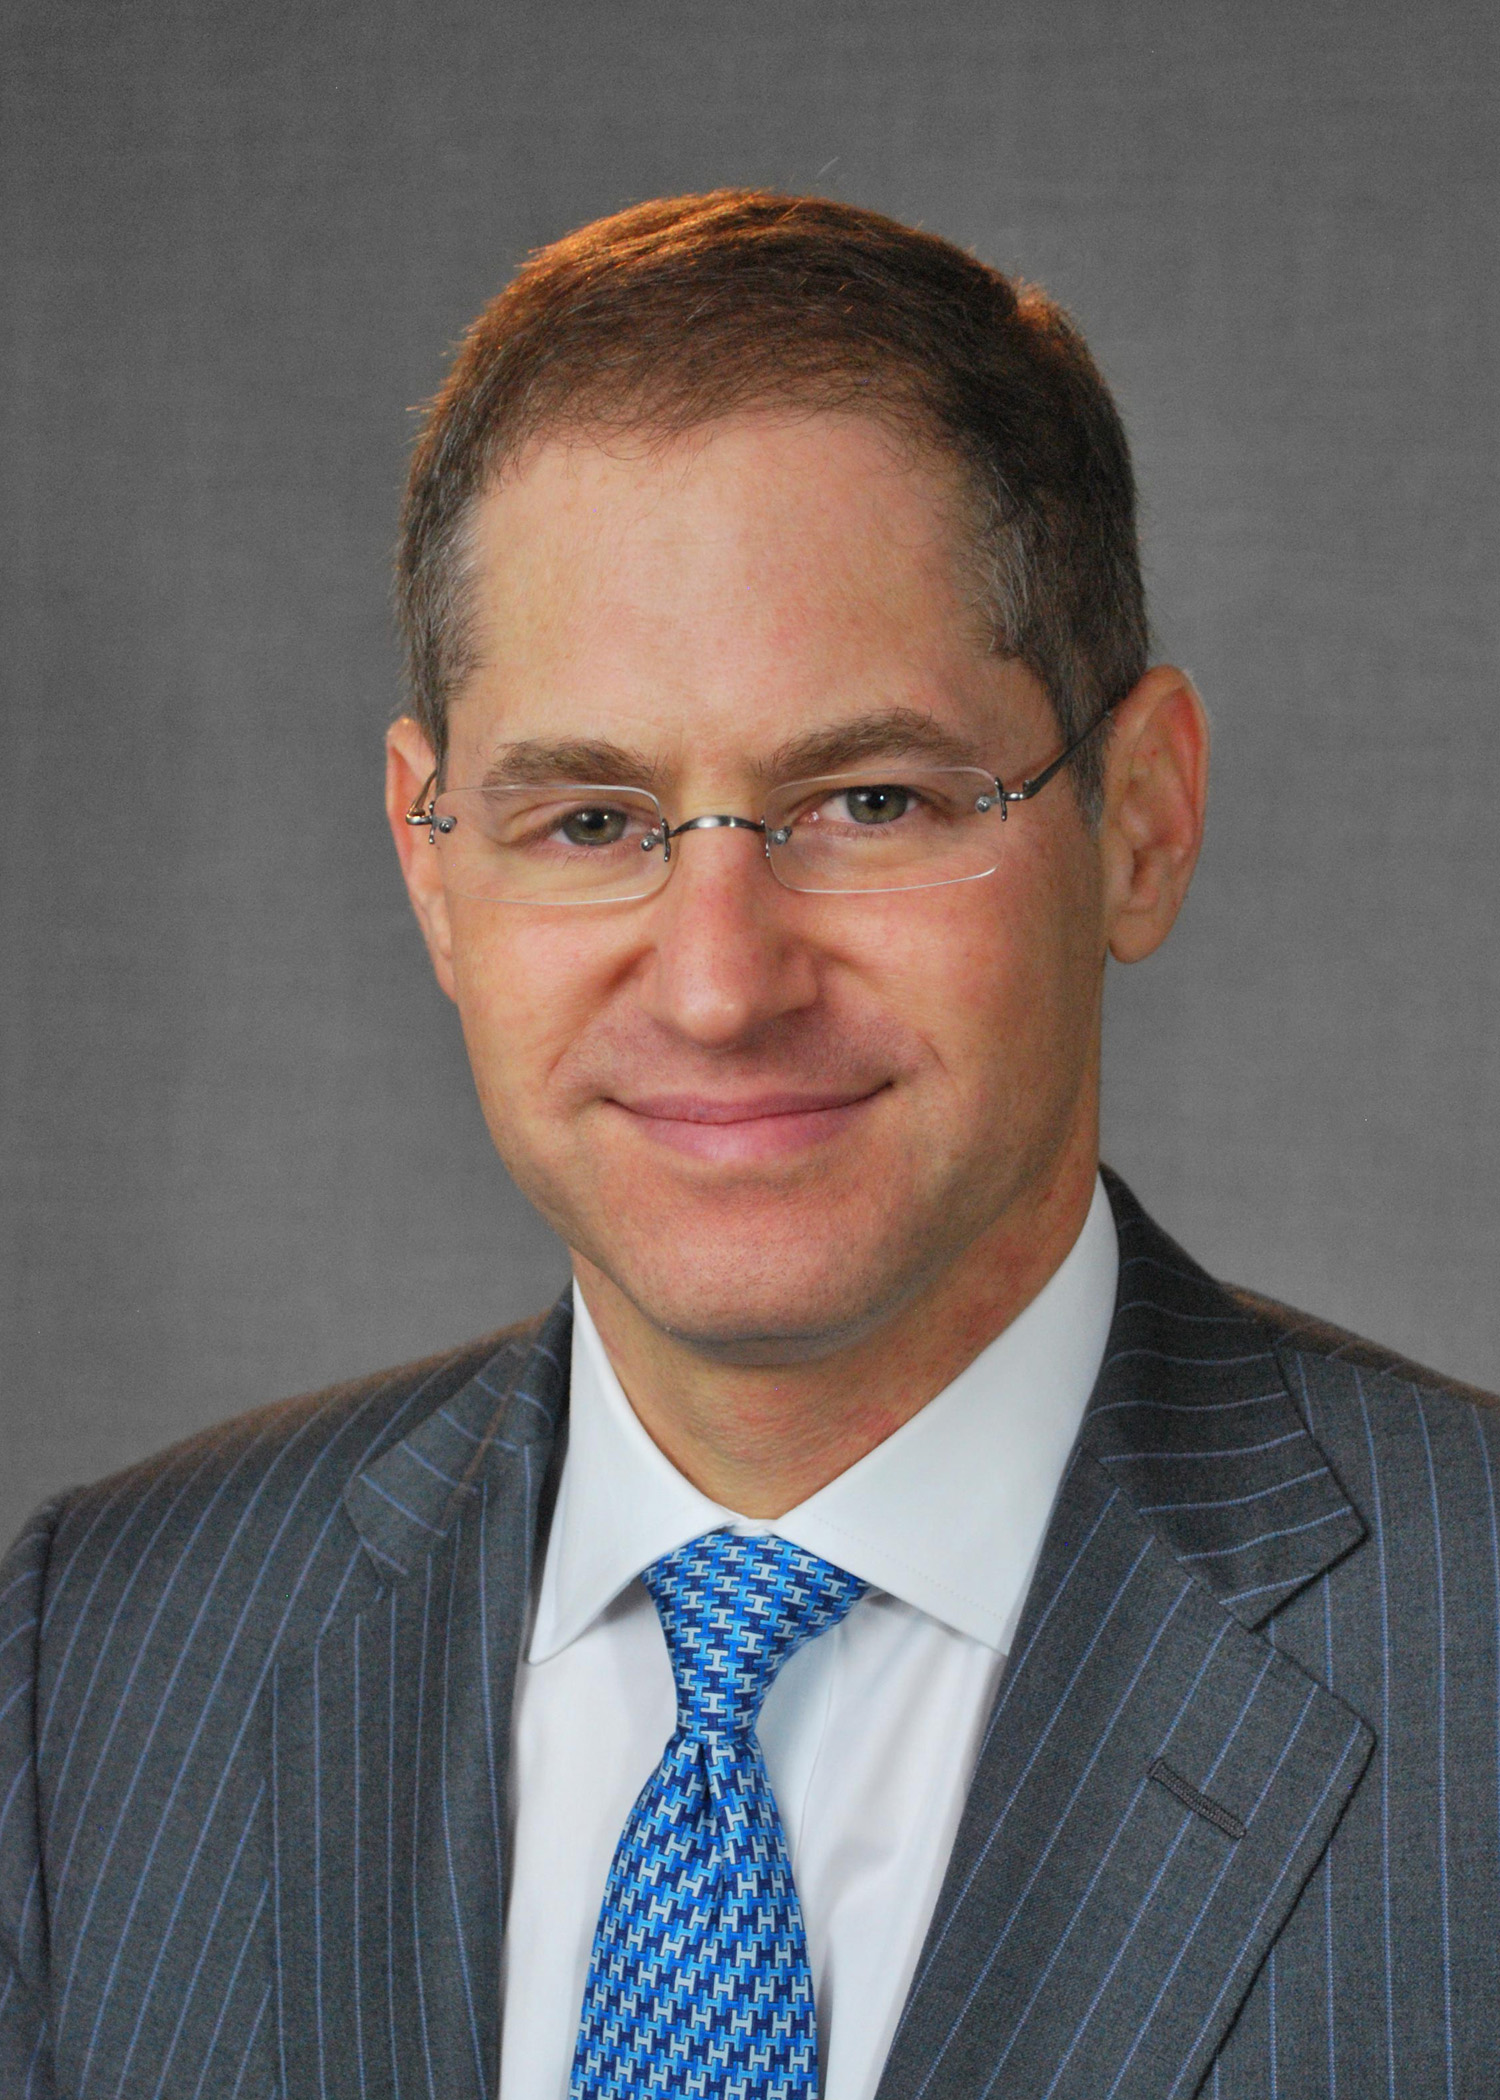 Tony Roth is Chief Investment Officer at Wilmington Trust.